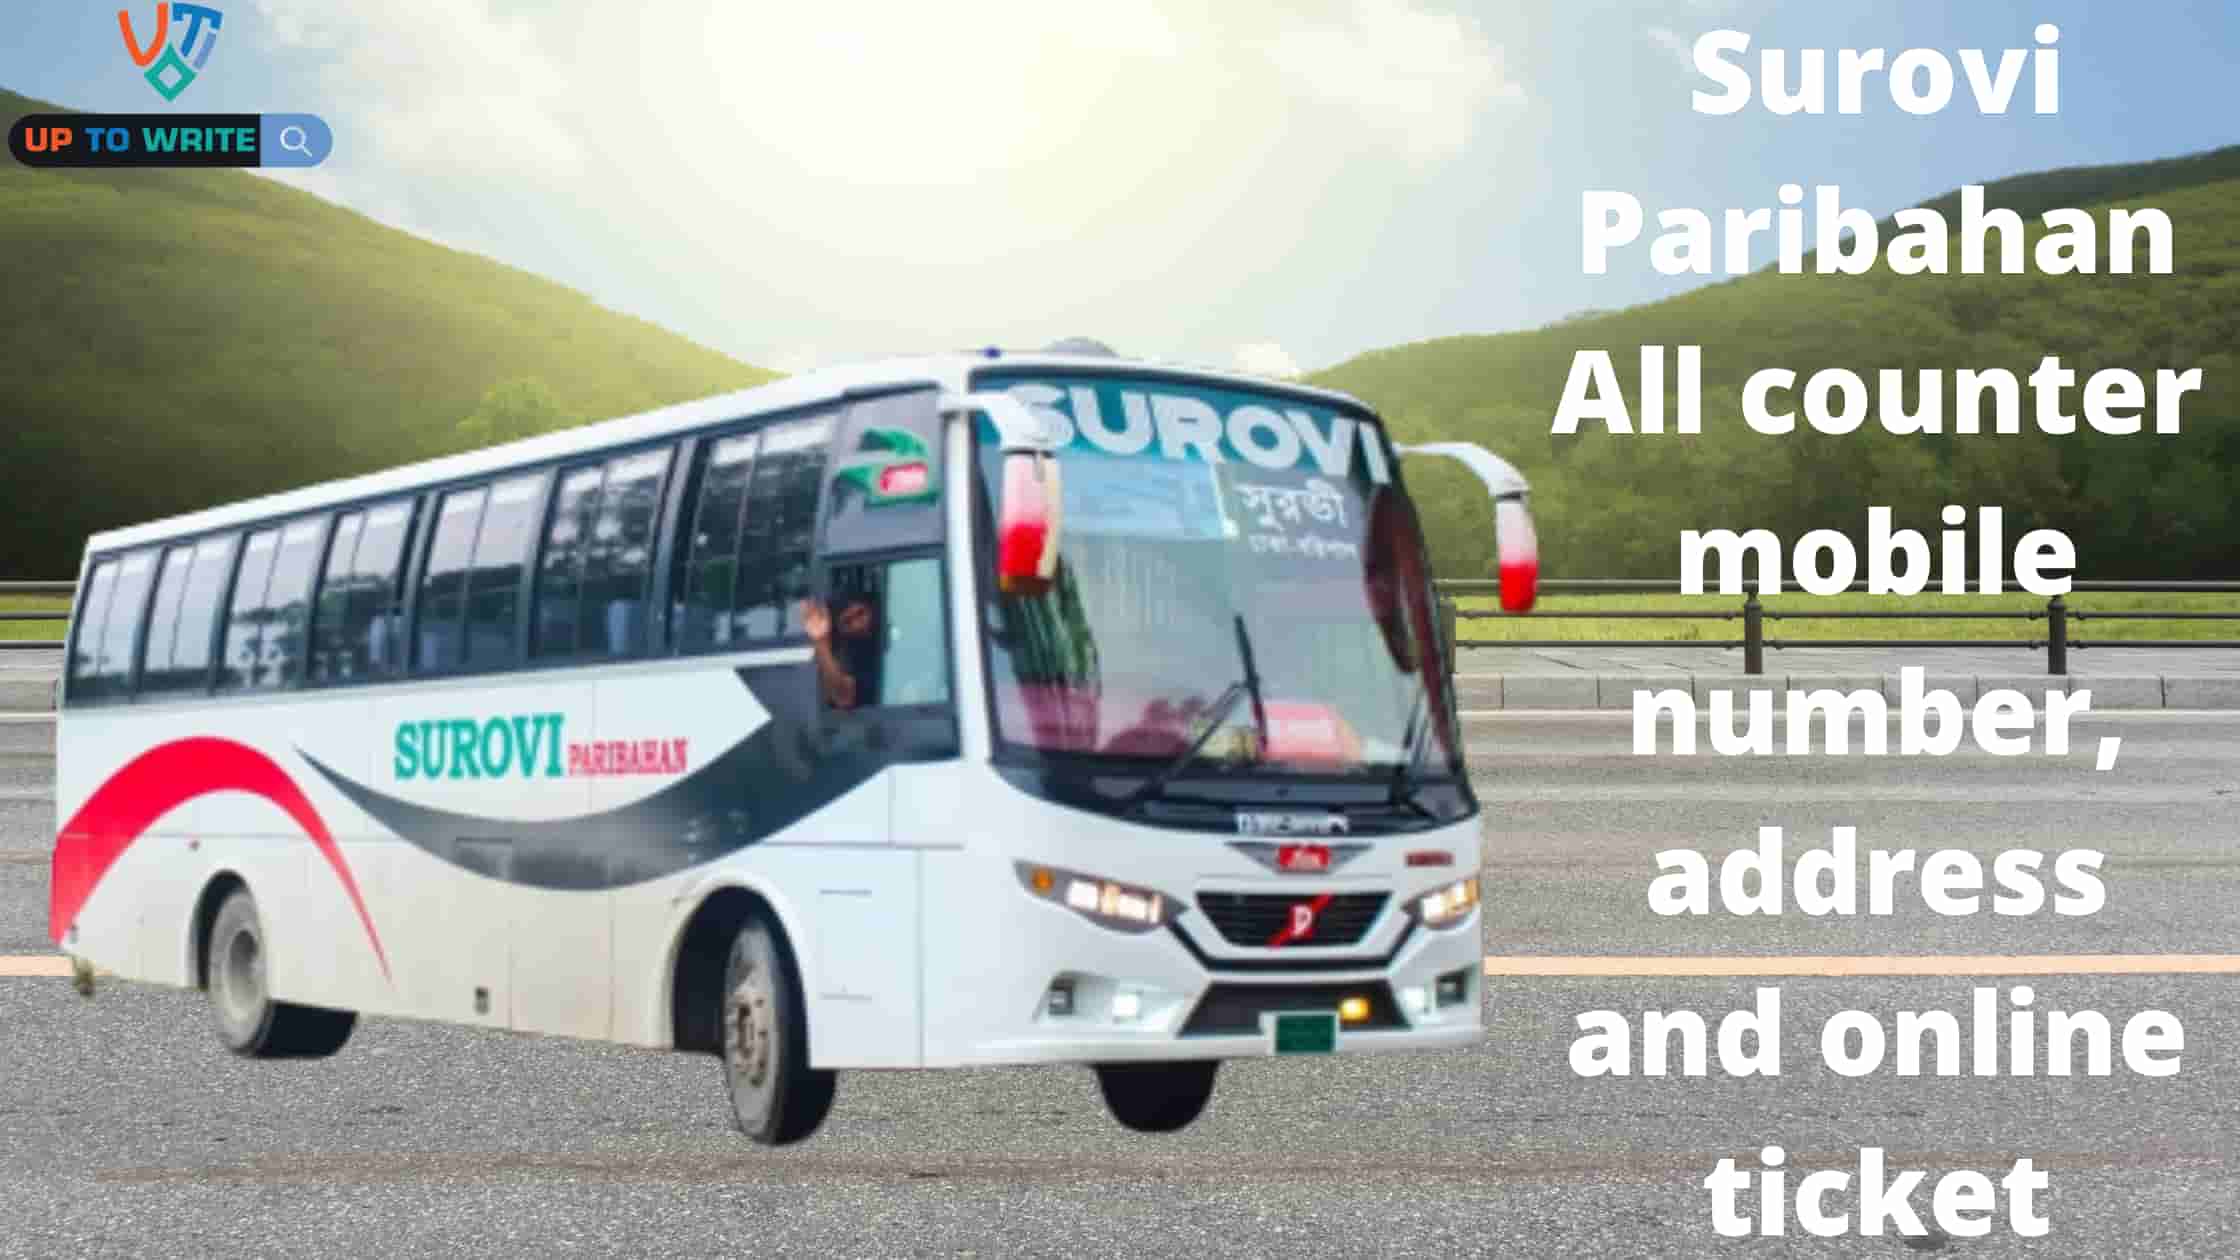 Surovi Paribahan All counter mobile number, address and online ticket